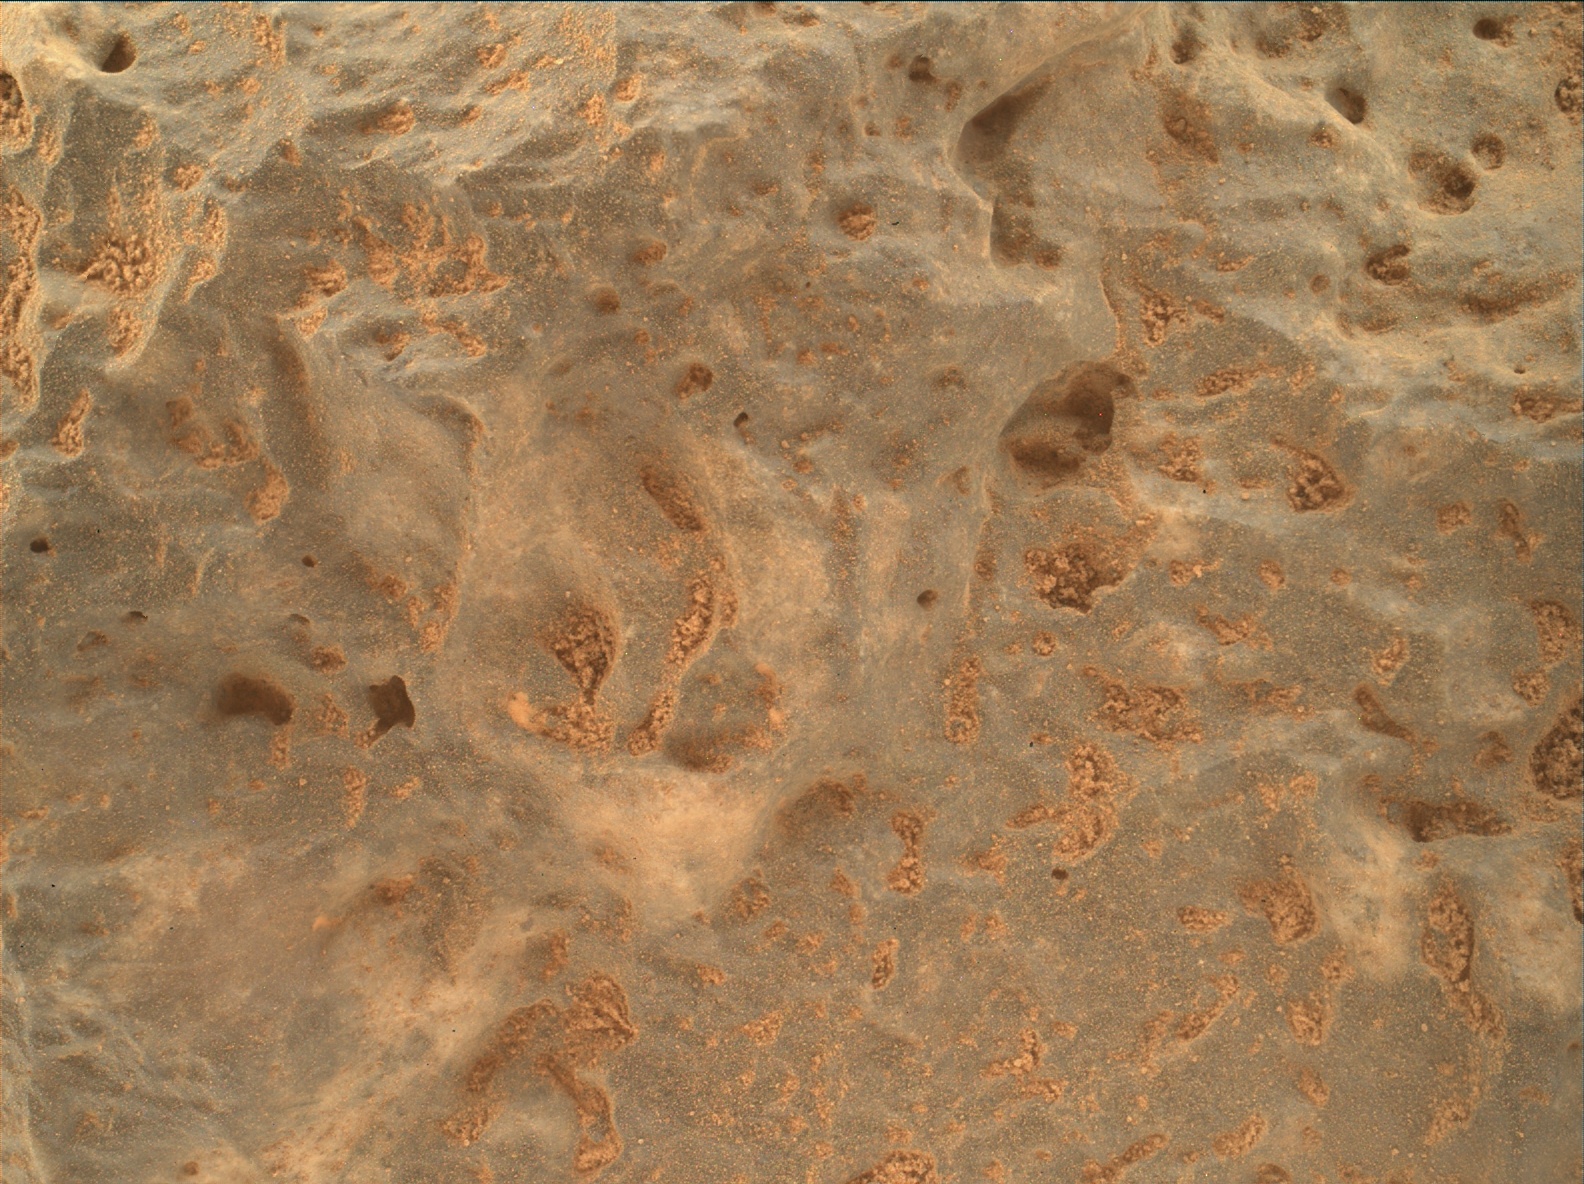 Nasa's Mars rover Curiosity acquired this image using its Mars Hand Lens Imager (MAHLI) on Sol 511